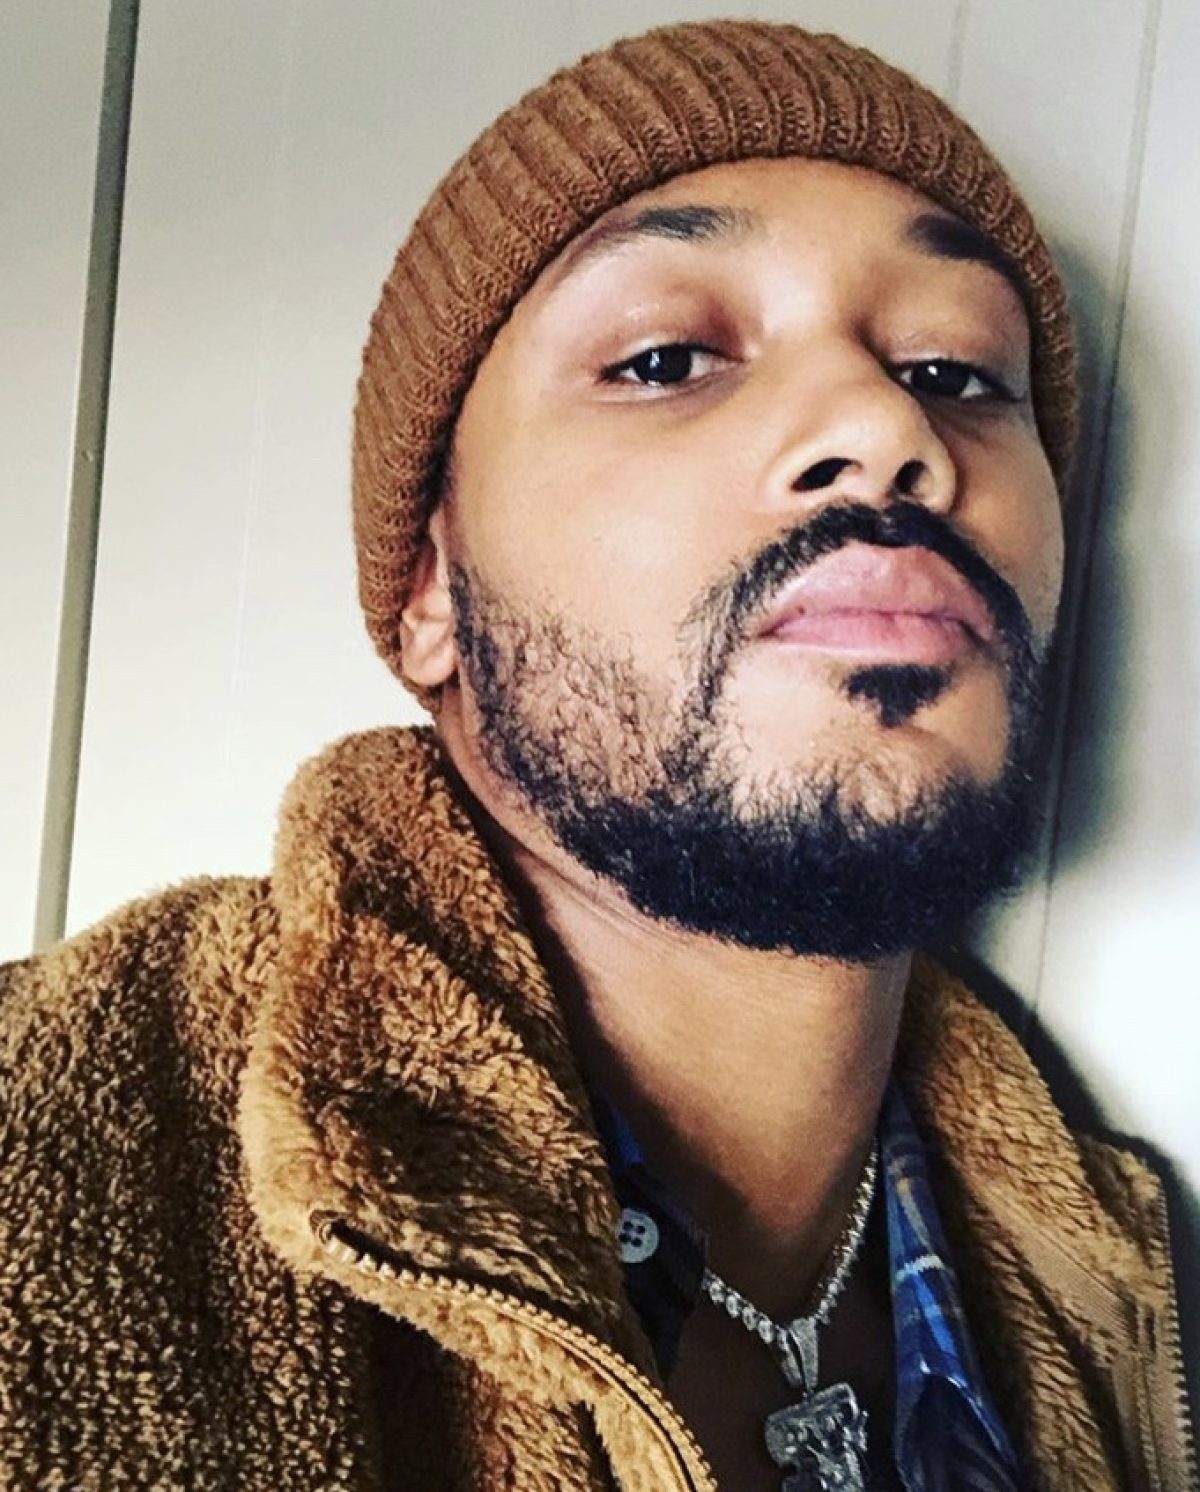 Romeo Miller Addresses His Current Relationship With Angela Simmons In  Lengthy Instagram Post—“We Haven't Been Close In Years”